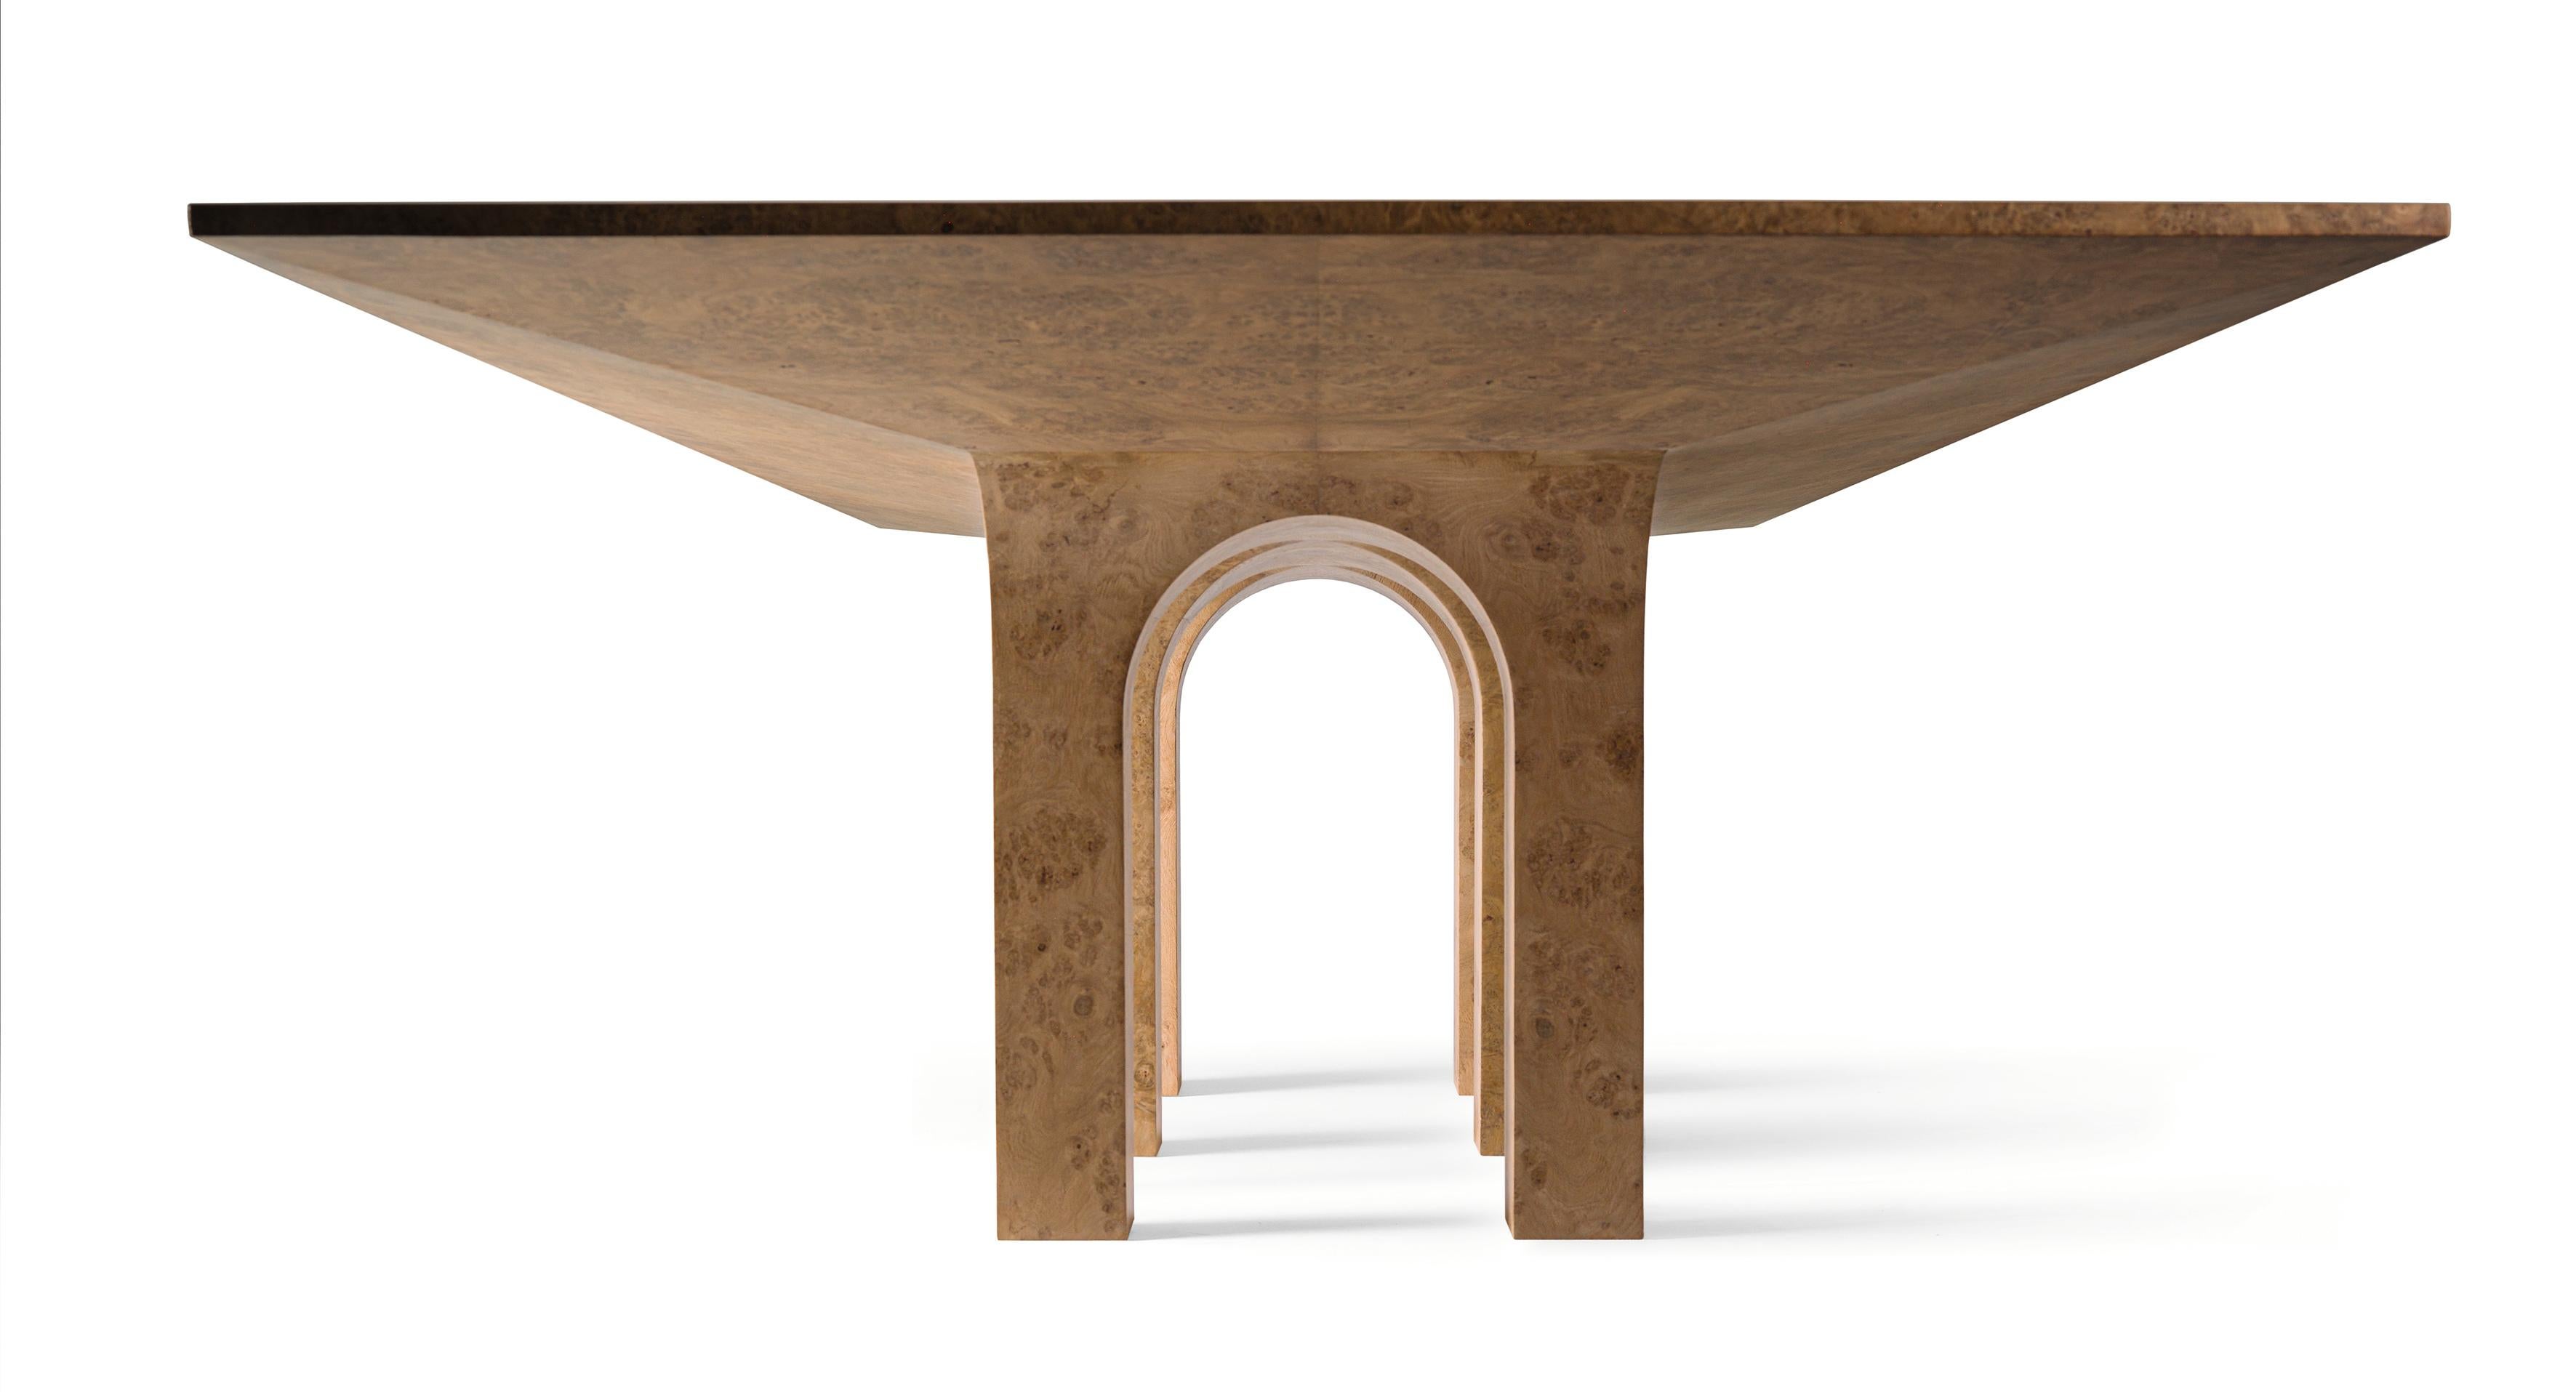 Italian ARCHI Dining Table in Oak Burl and Ebony Inlays - Arches Shaped Legs For Sale